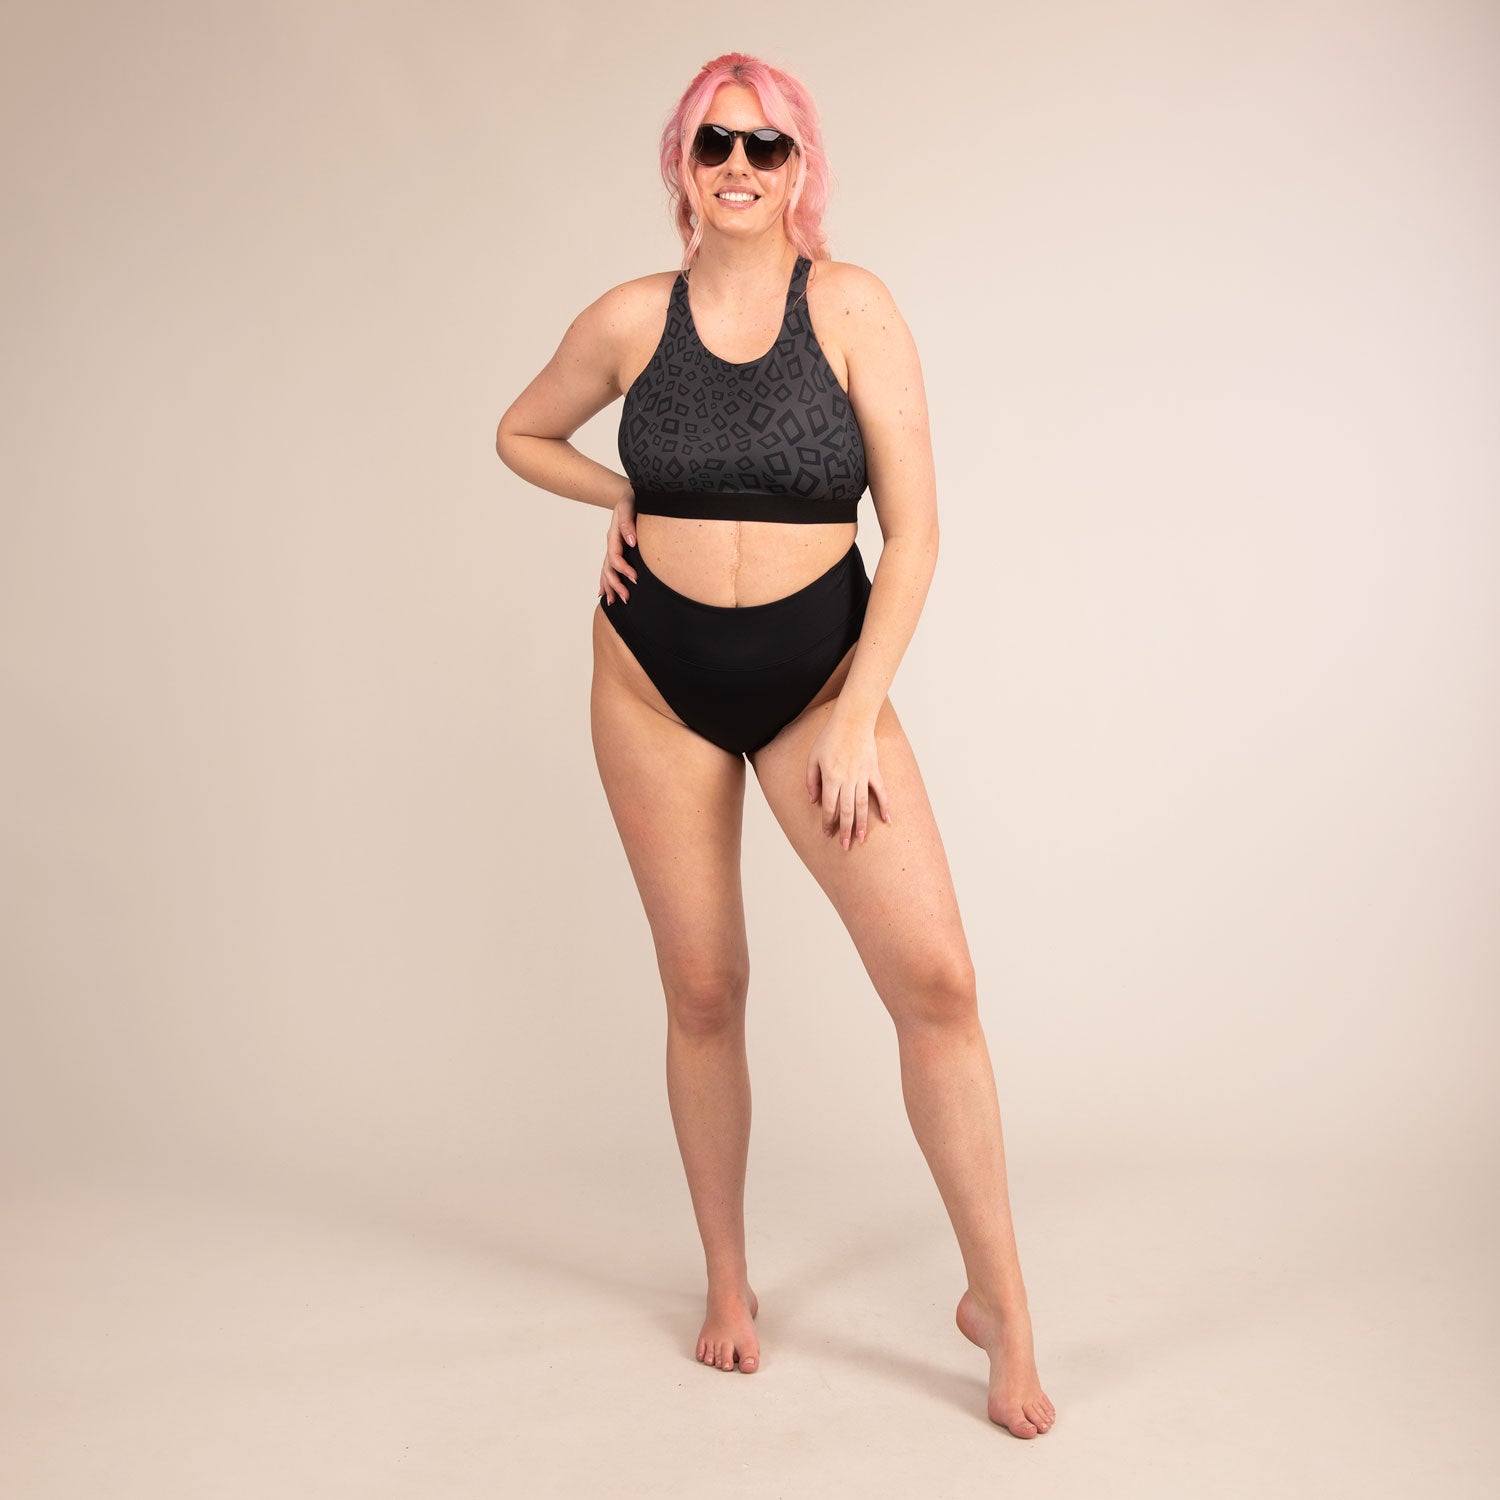 EQUINOX MINIMAL LEOPARD | Reversible Recycled Sports Bra | 3RD ROCK Clothing -  Sophie is a 34G with a 32" underbust, 40.5" overbust and wears a size 16 F